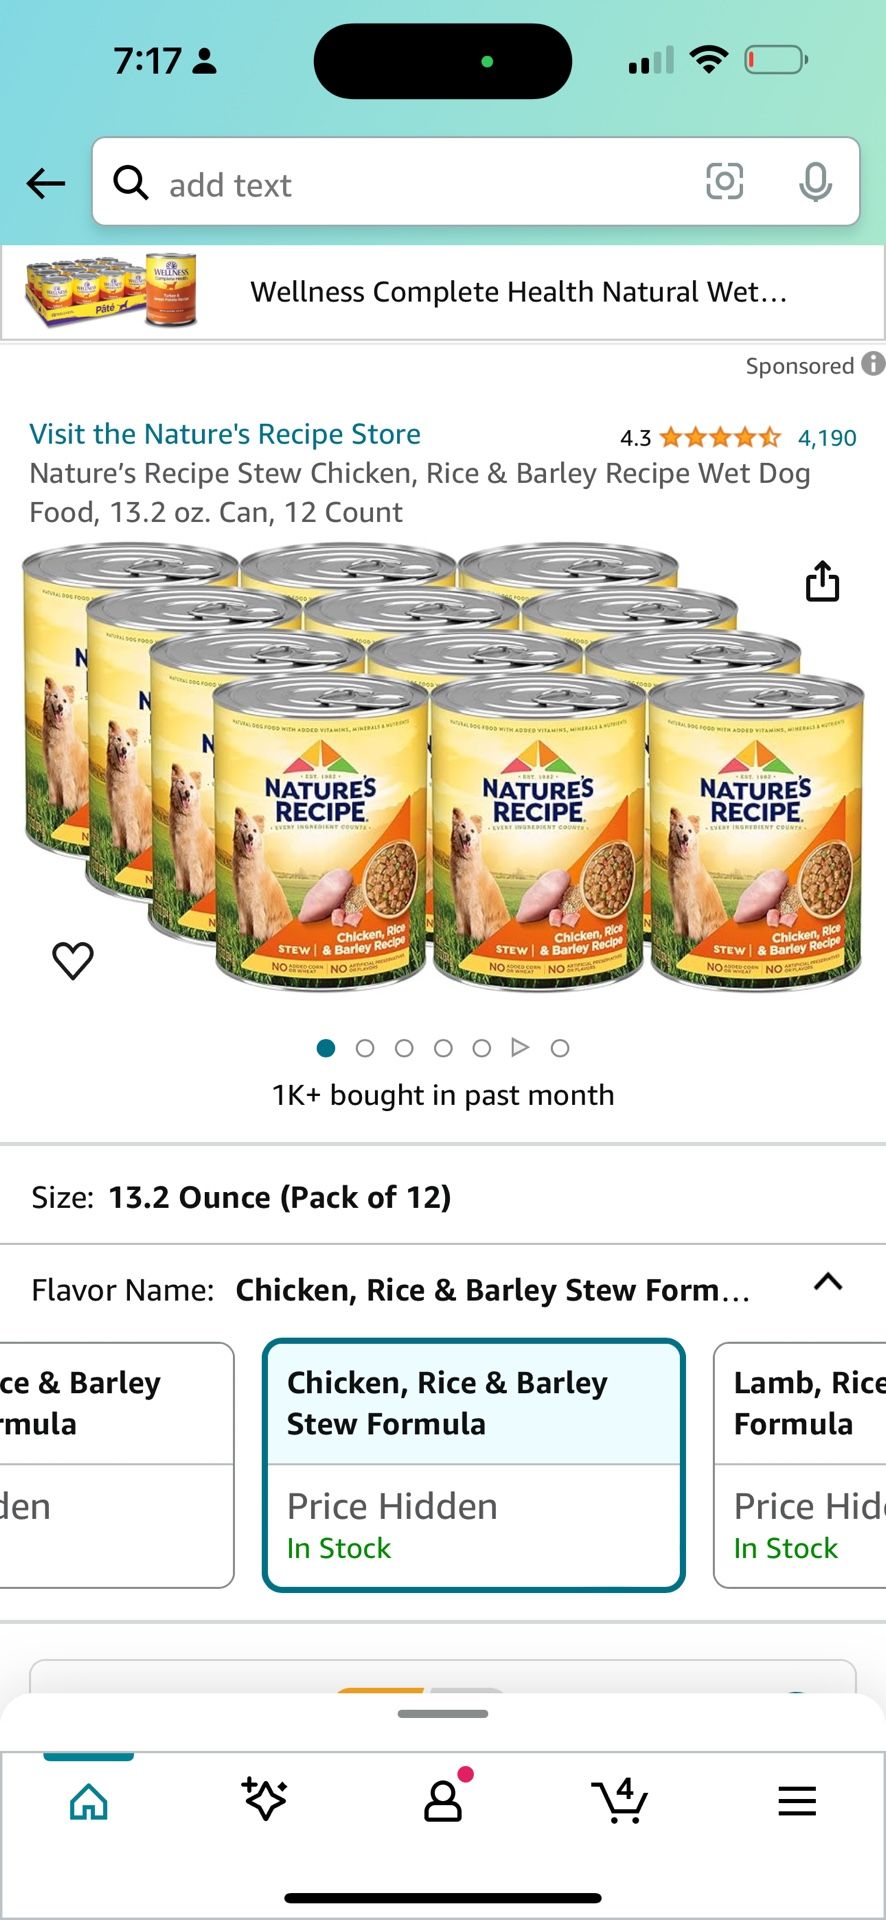 Nature’s Recipe Stew Chicken, Rice & Barley Recipe Wet Dog Food, 13.2 oz. Can, 12 Count $25